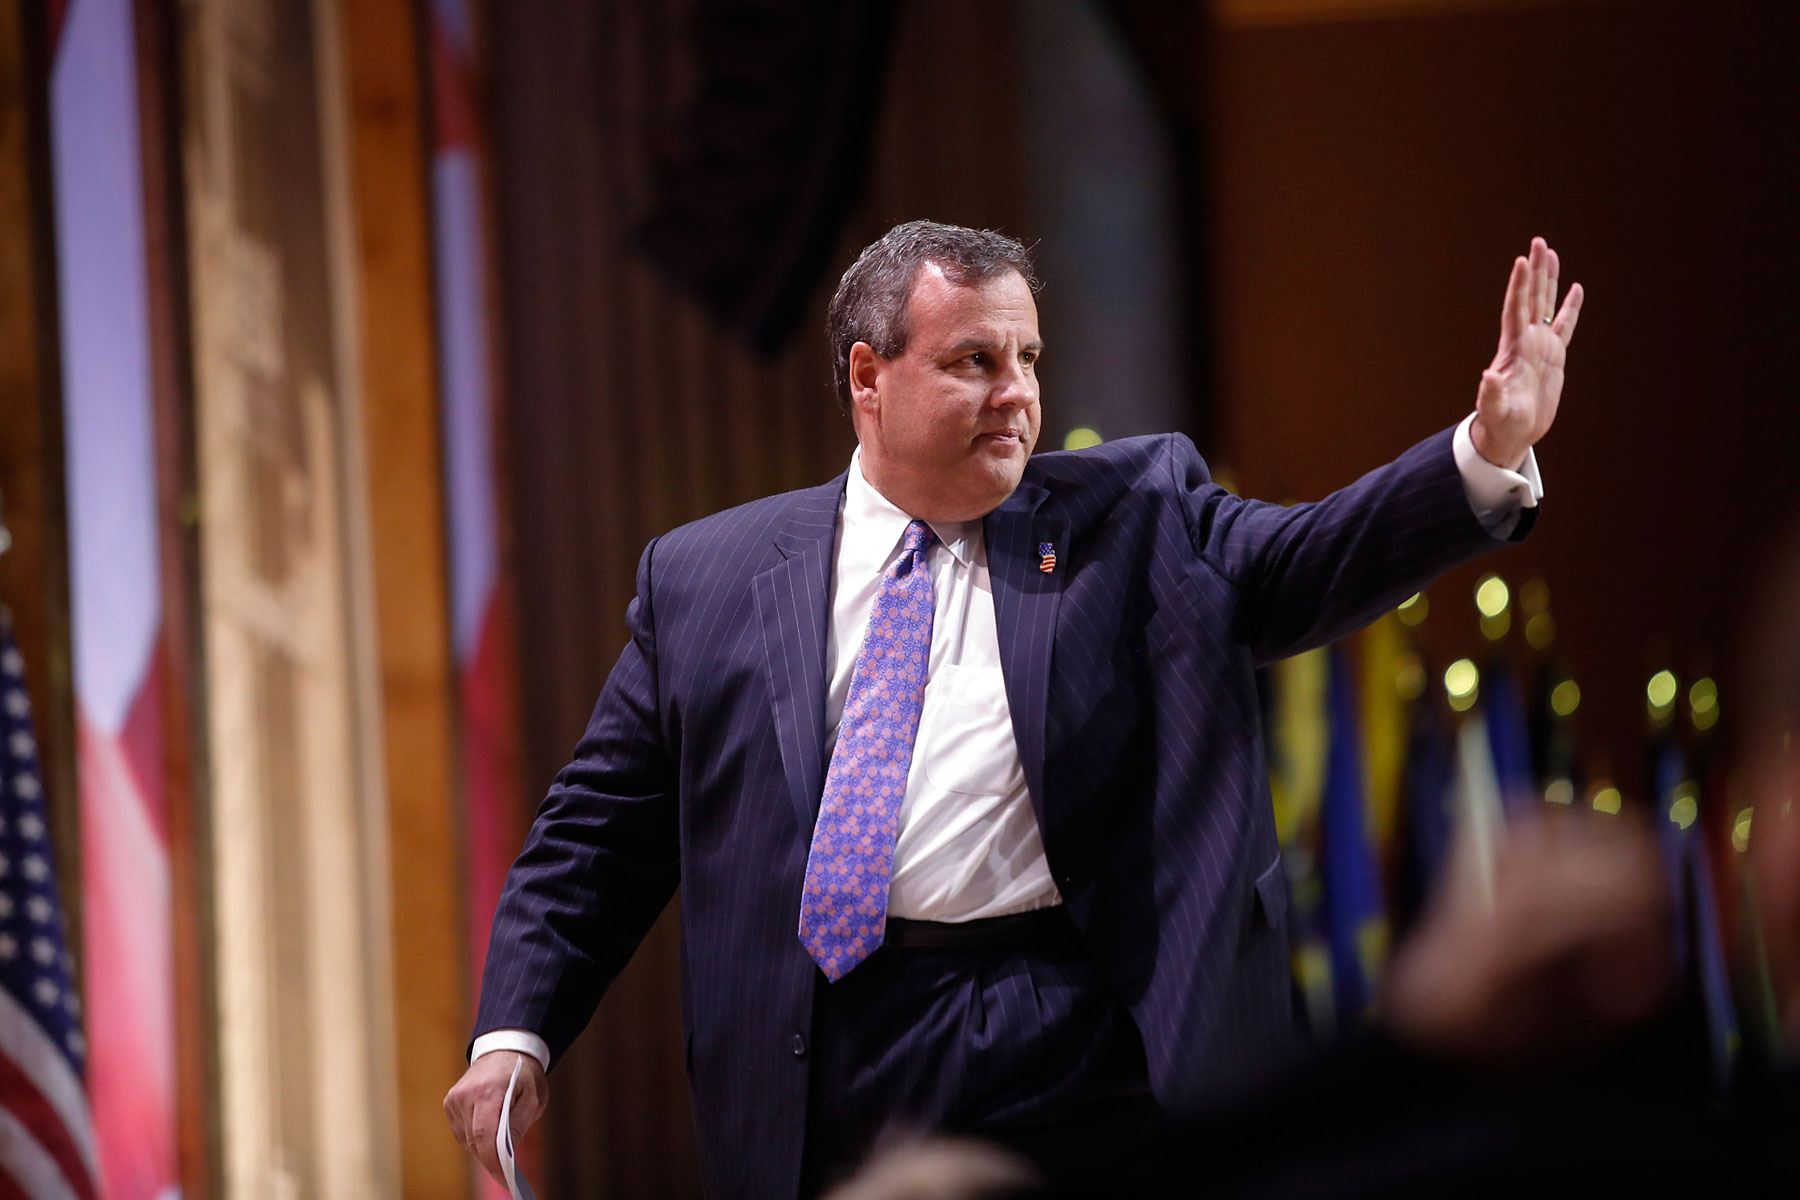 New Jersey Governor Chris Christie speaks during the Conservative Political Action Conference at the Gaylord National Resort &amp; Convention Center in National Harbor, Md., March 6, 2014.